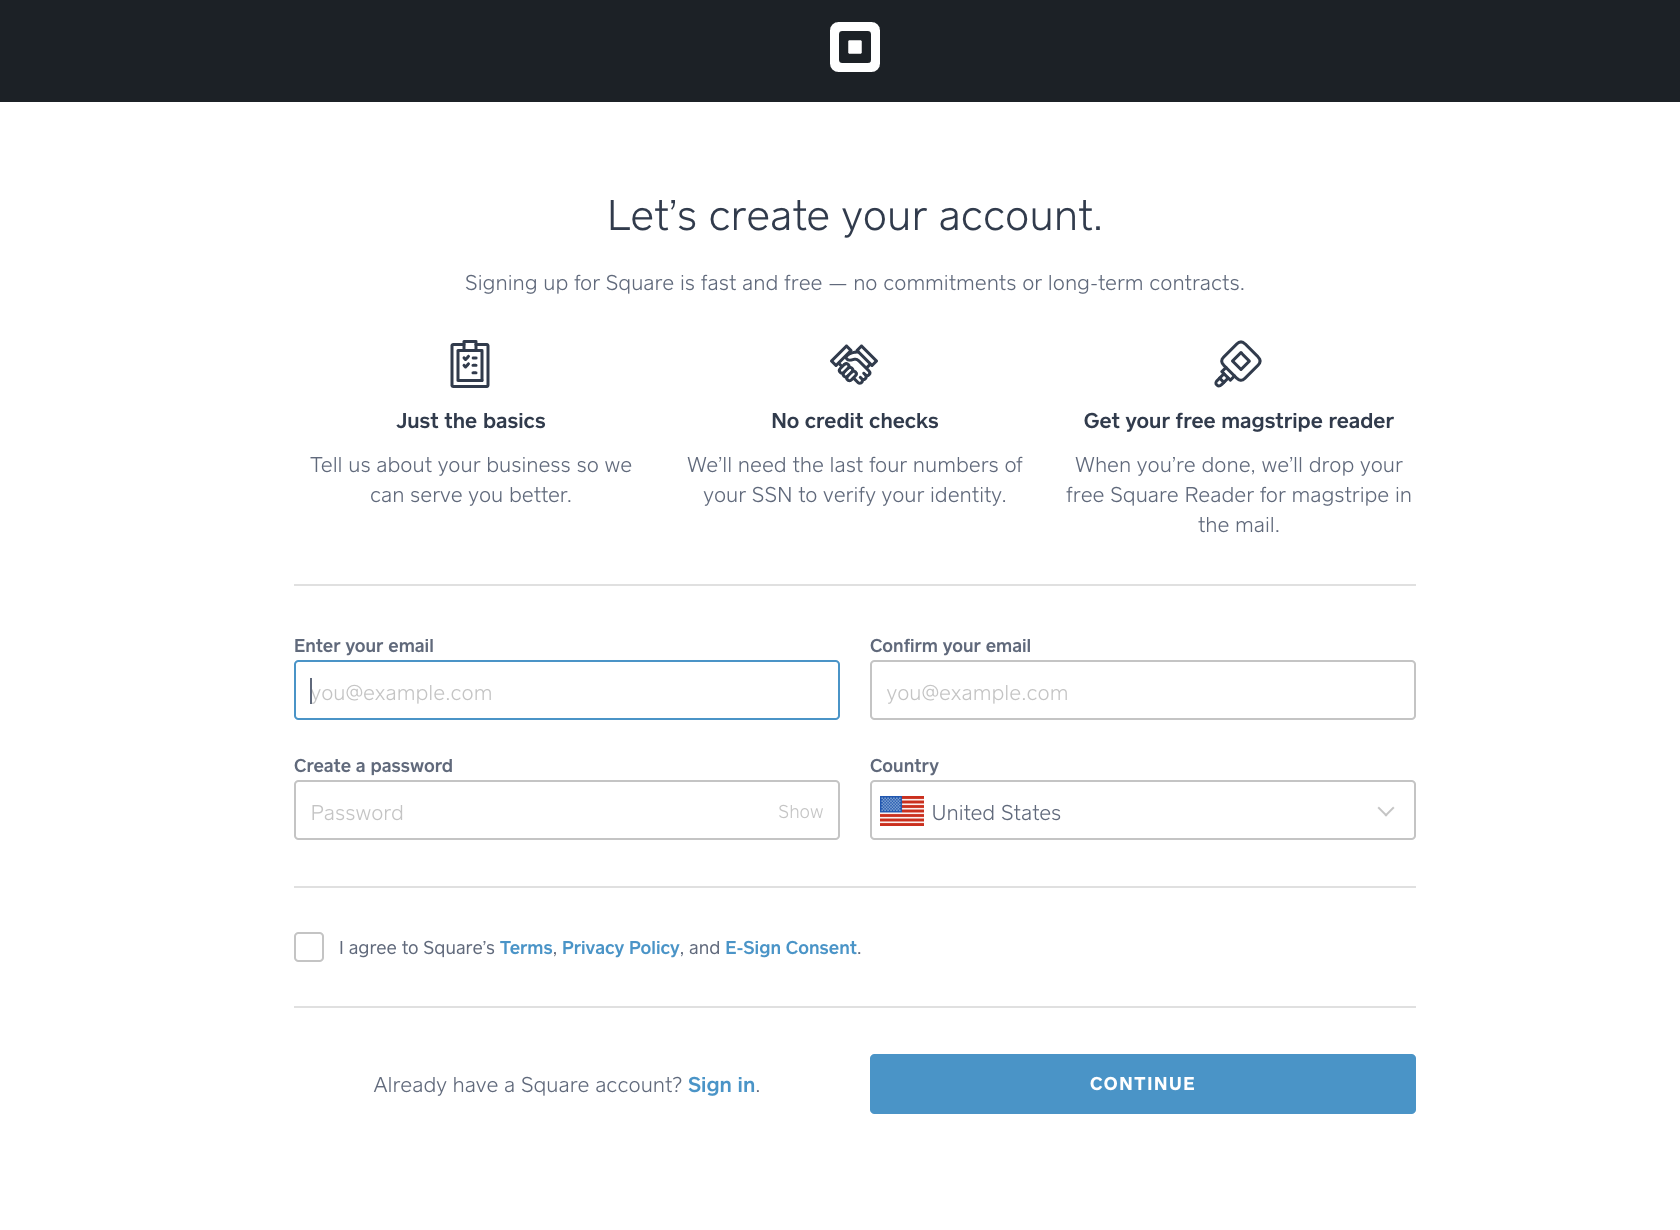 Sign up for your free Square account, then stay logged in to Square during the setup of your WooCommerce Square plugin